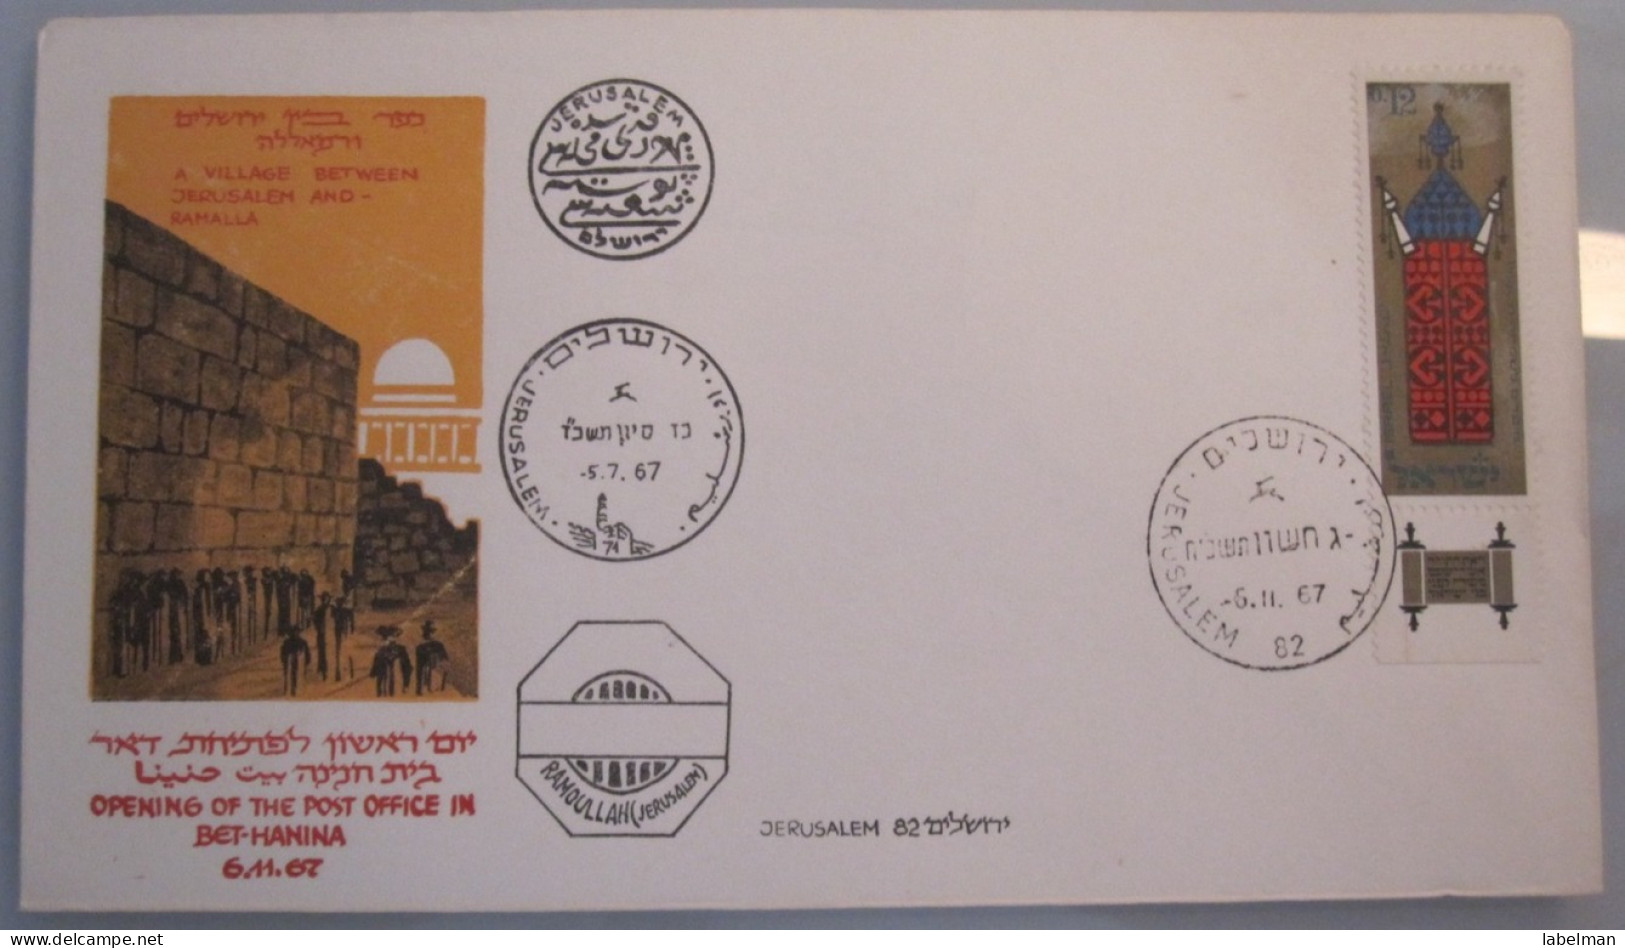 1967 POO FIRST DAY POST OFFICE OPENING MILITARY GOVERNMENT PALESTINE BET HANINA JERUSALEM 6 DAYS WAR COVER ISRAEL CACHET - Covers & Documents